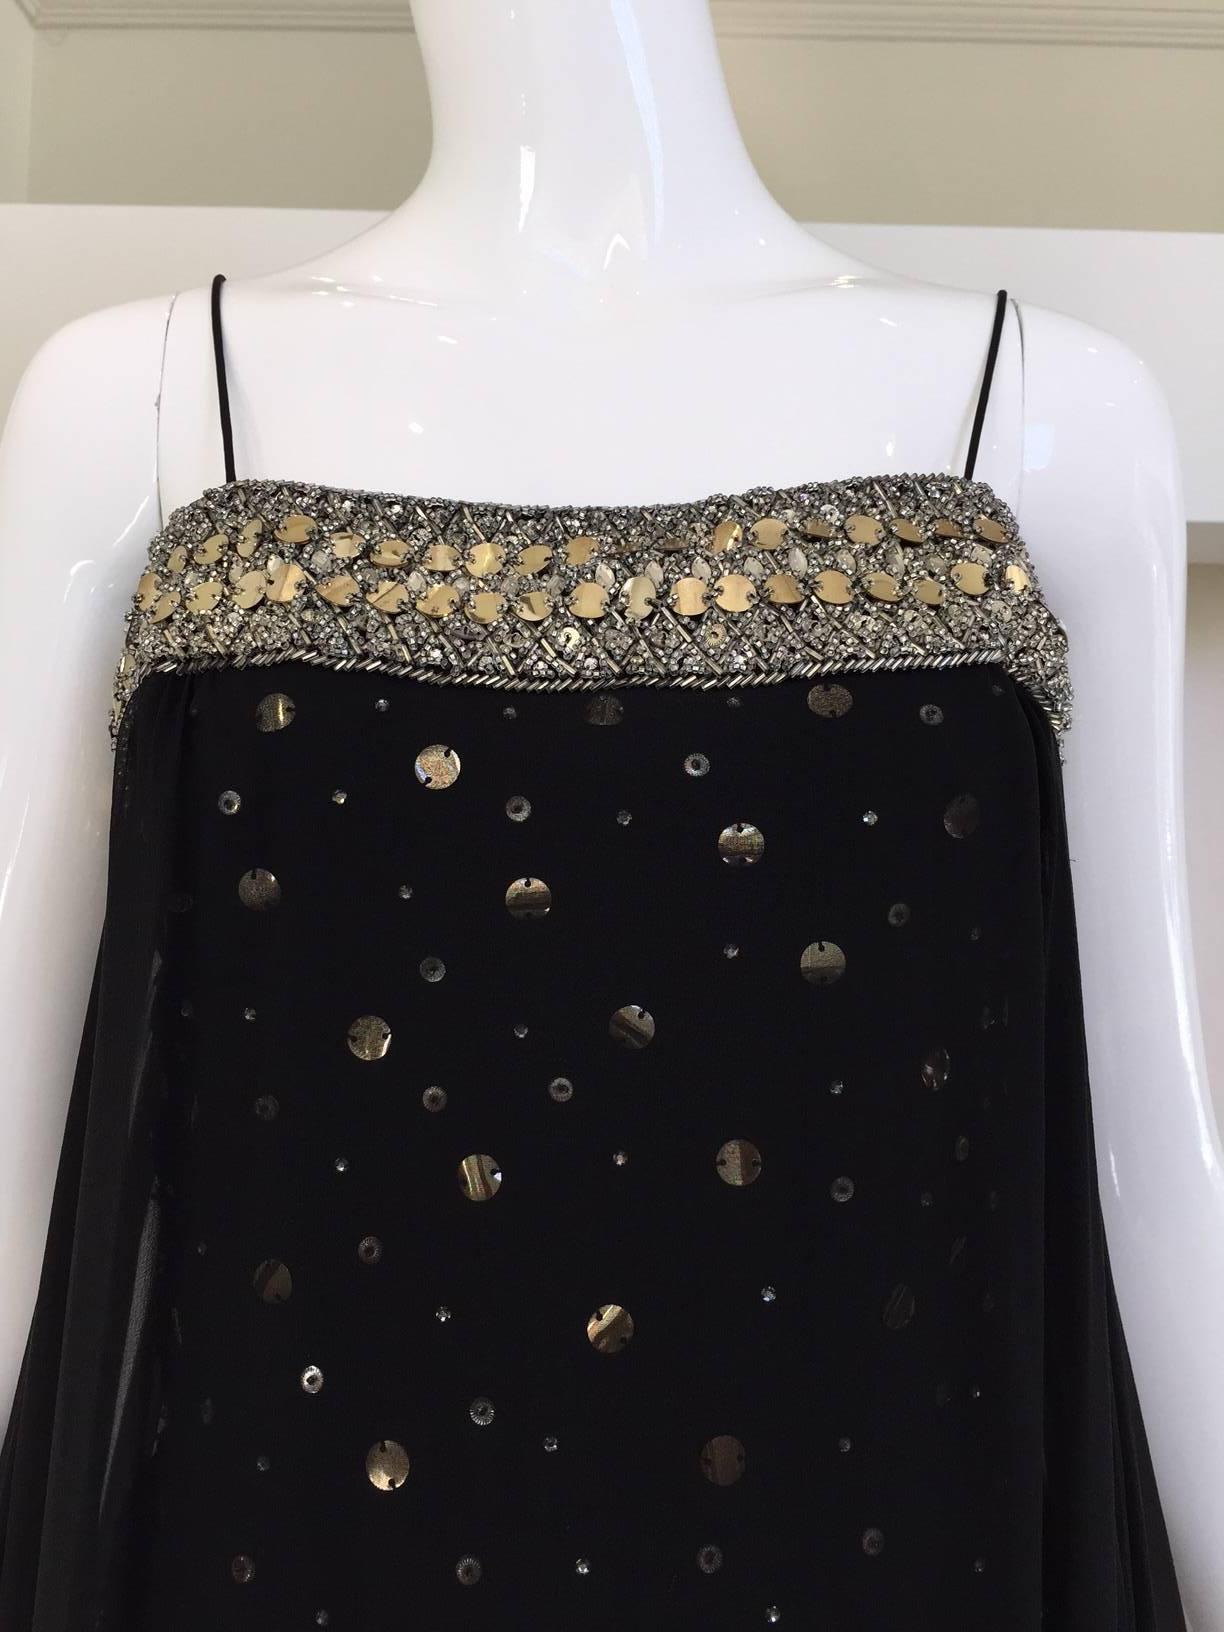 Vintage 1960s black spaghetti strap silk overlay cocktail gown with rhinestones. Lining is encrusted with Silver Sequins paillettes.  Unlabelled. This gown could be designed by Malcolm Starr or Sarmi, 
Size: 4/6  Small - Medium